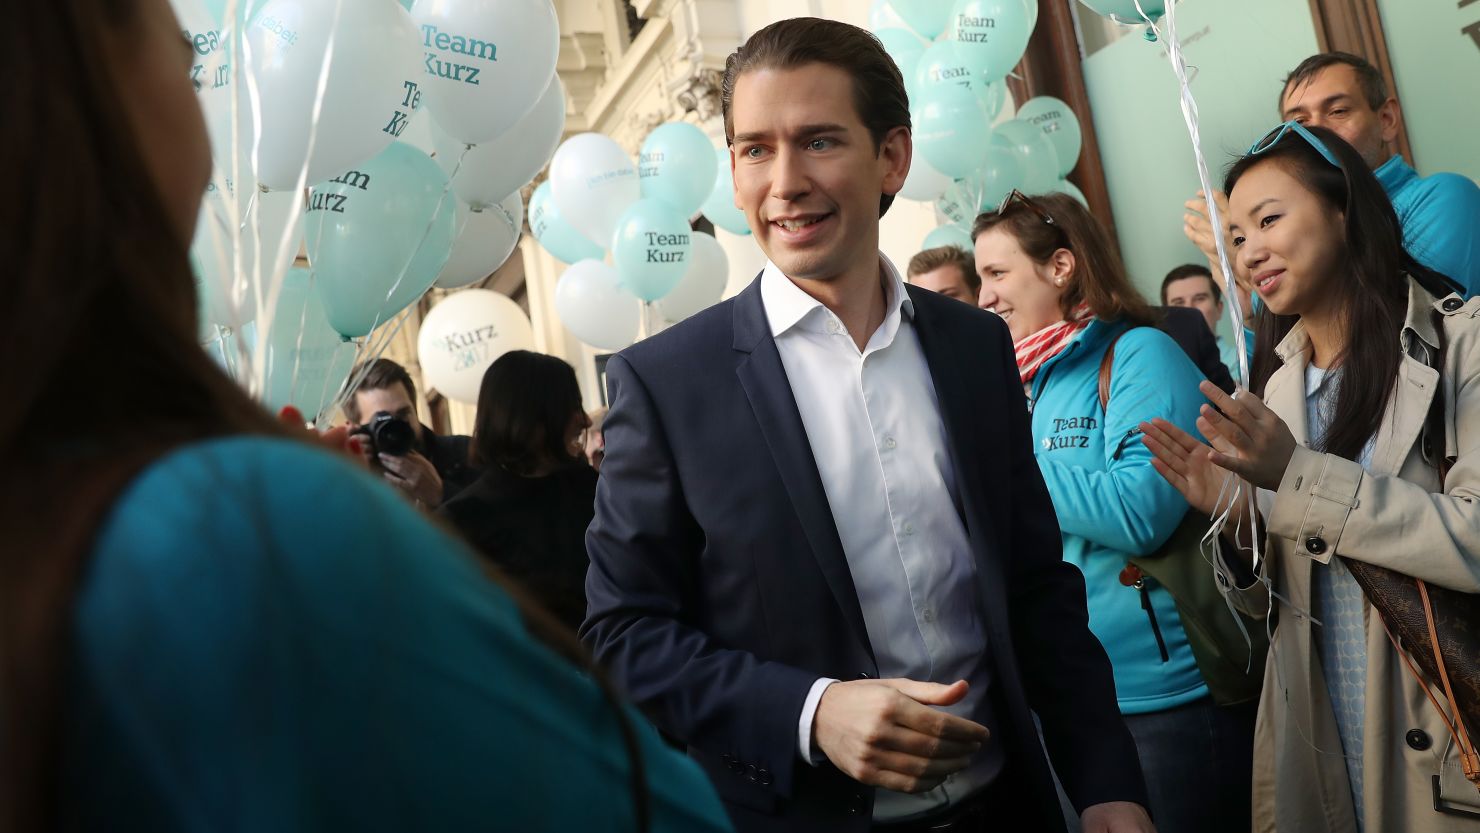 Austria's Foreign Minister, Sebastian Kurz, is in the running to become the country's youngest Chancellor.